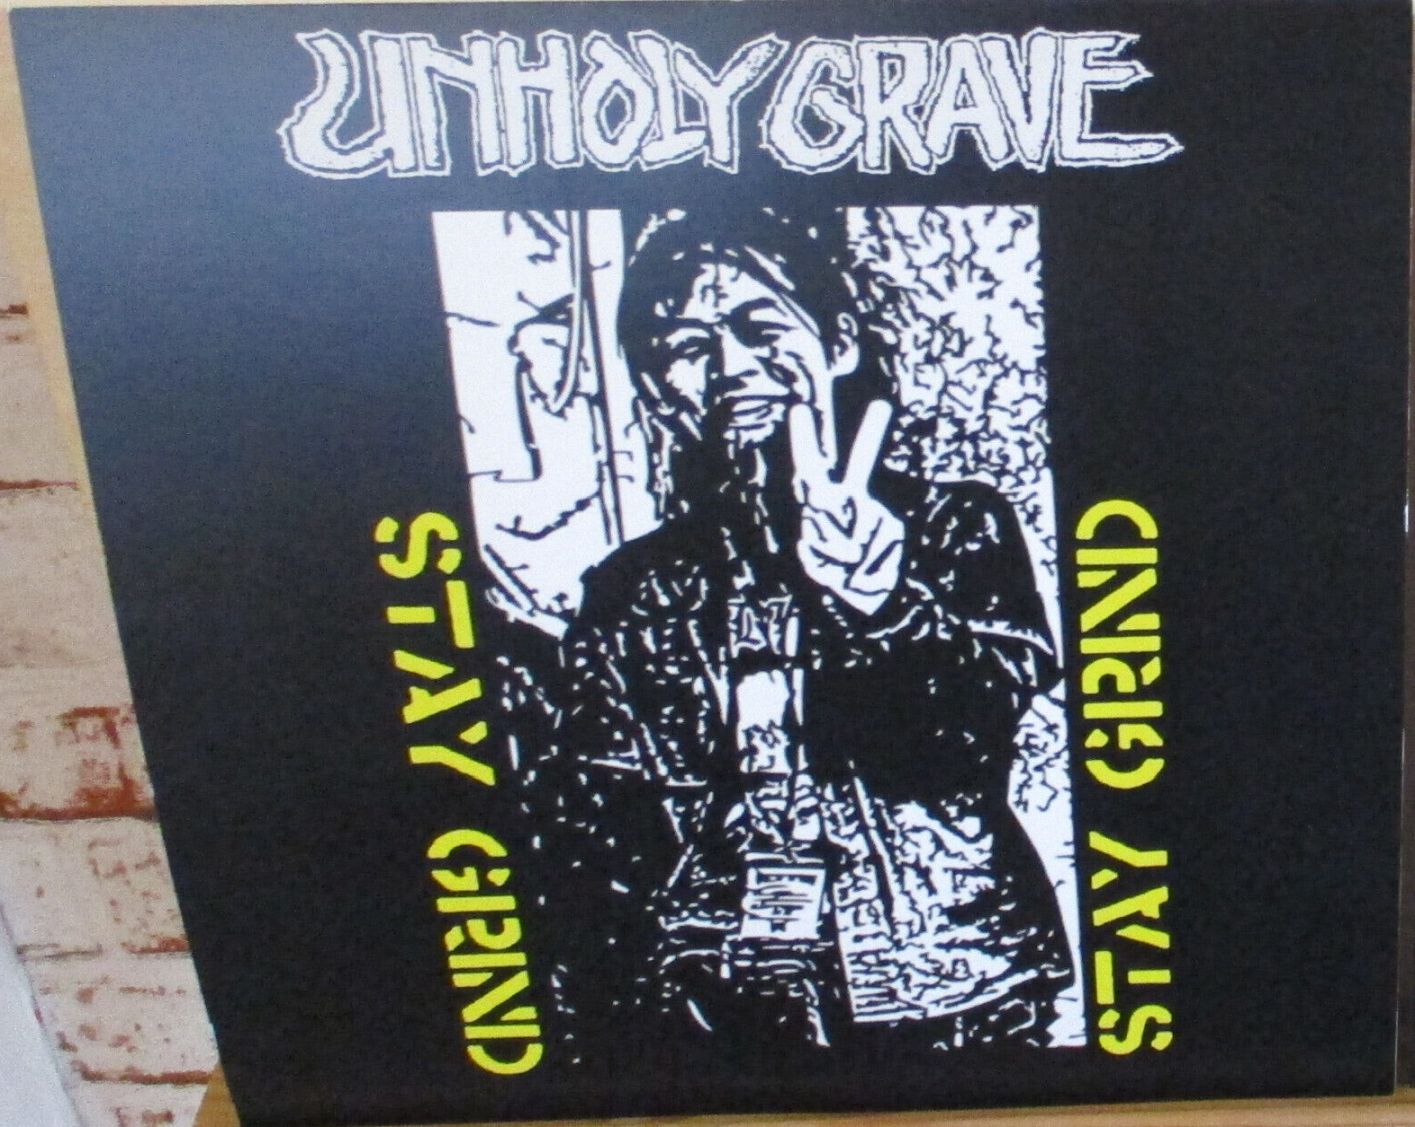 UNHOLY GRAVE - Secret Rehearsal - Stay Grind cover 